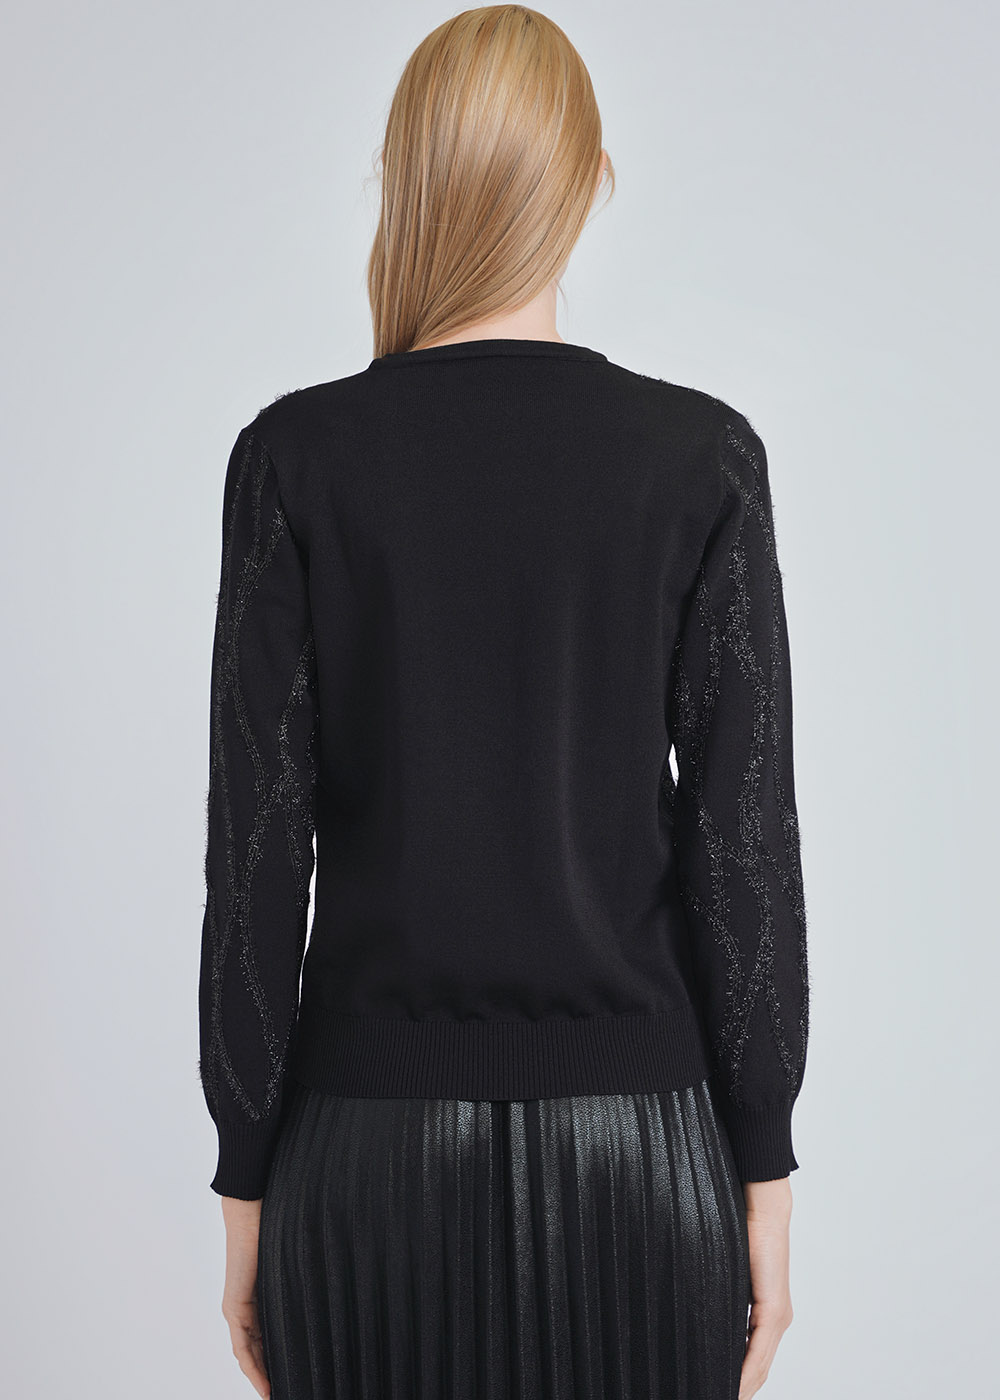 Embroidery-Accented Black Knit Top